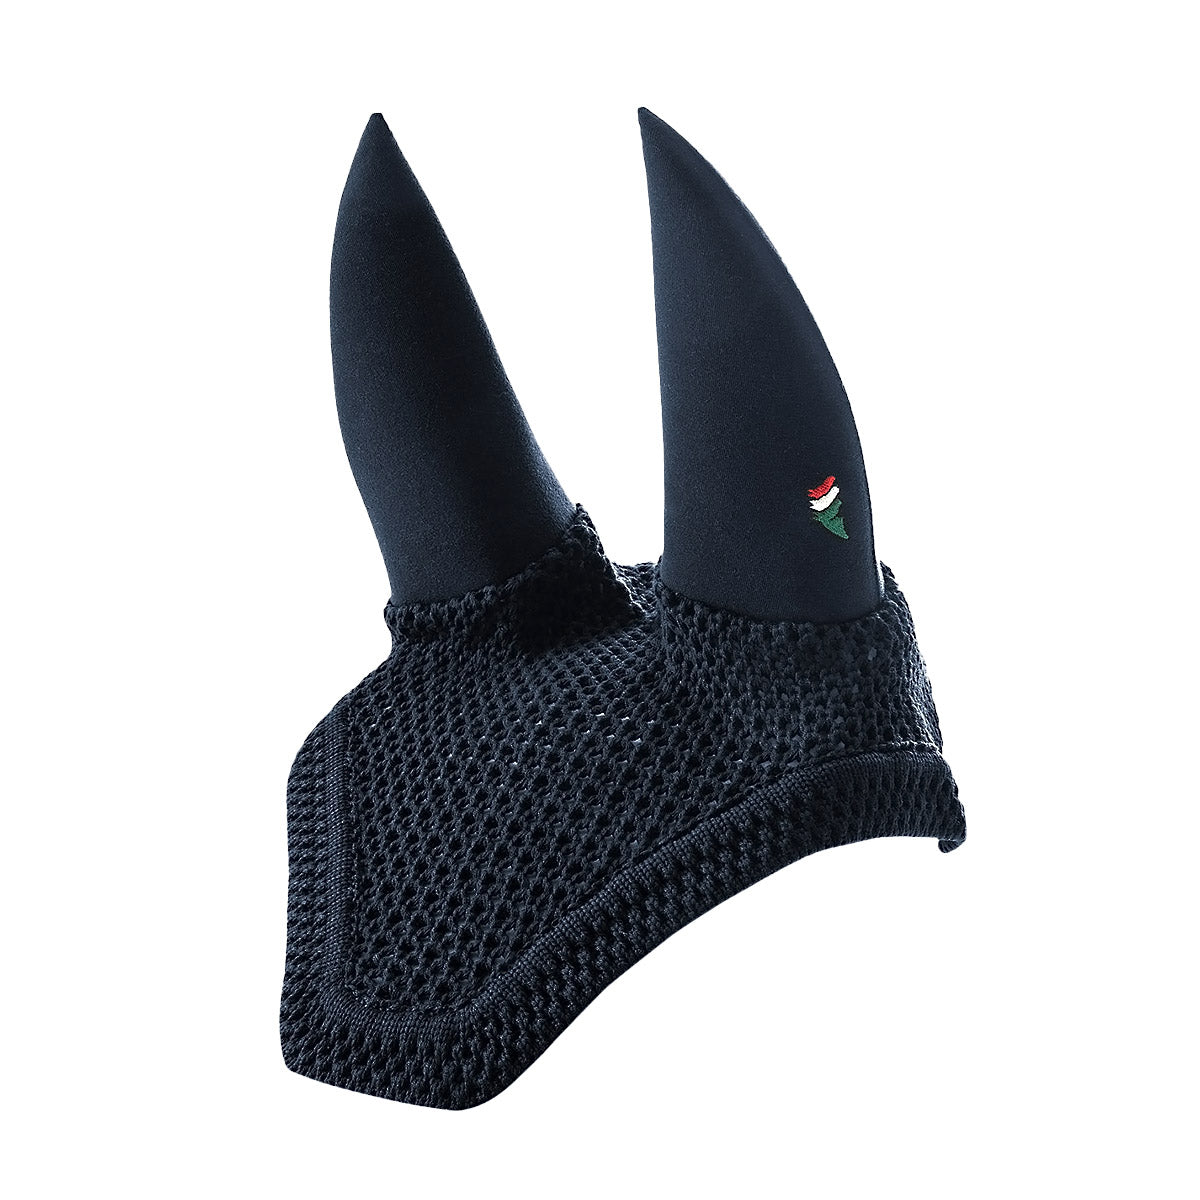 Equiline Dave Soundproof Ear Net